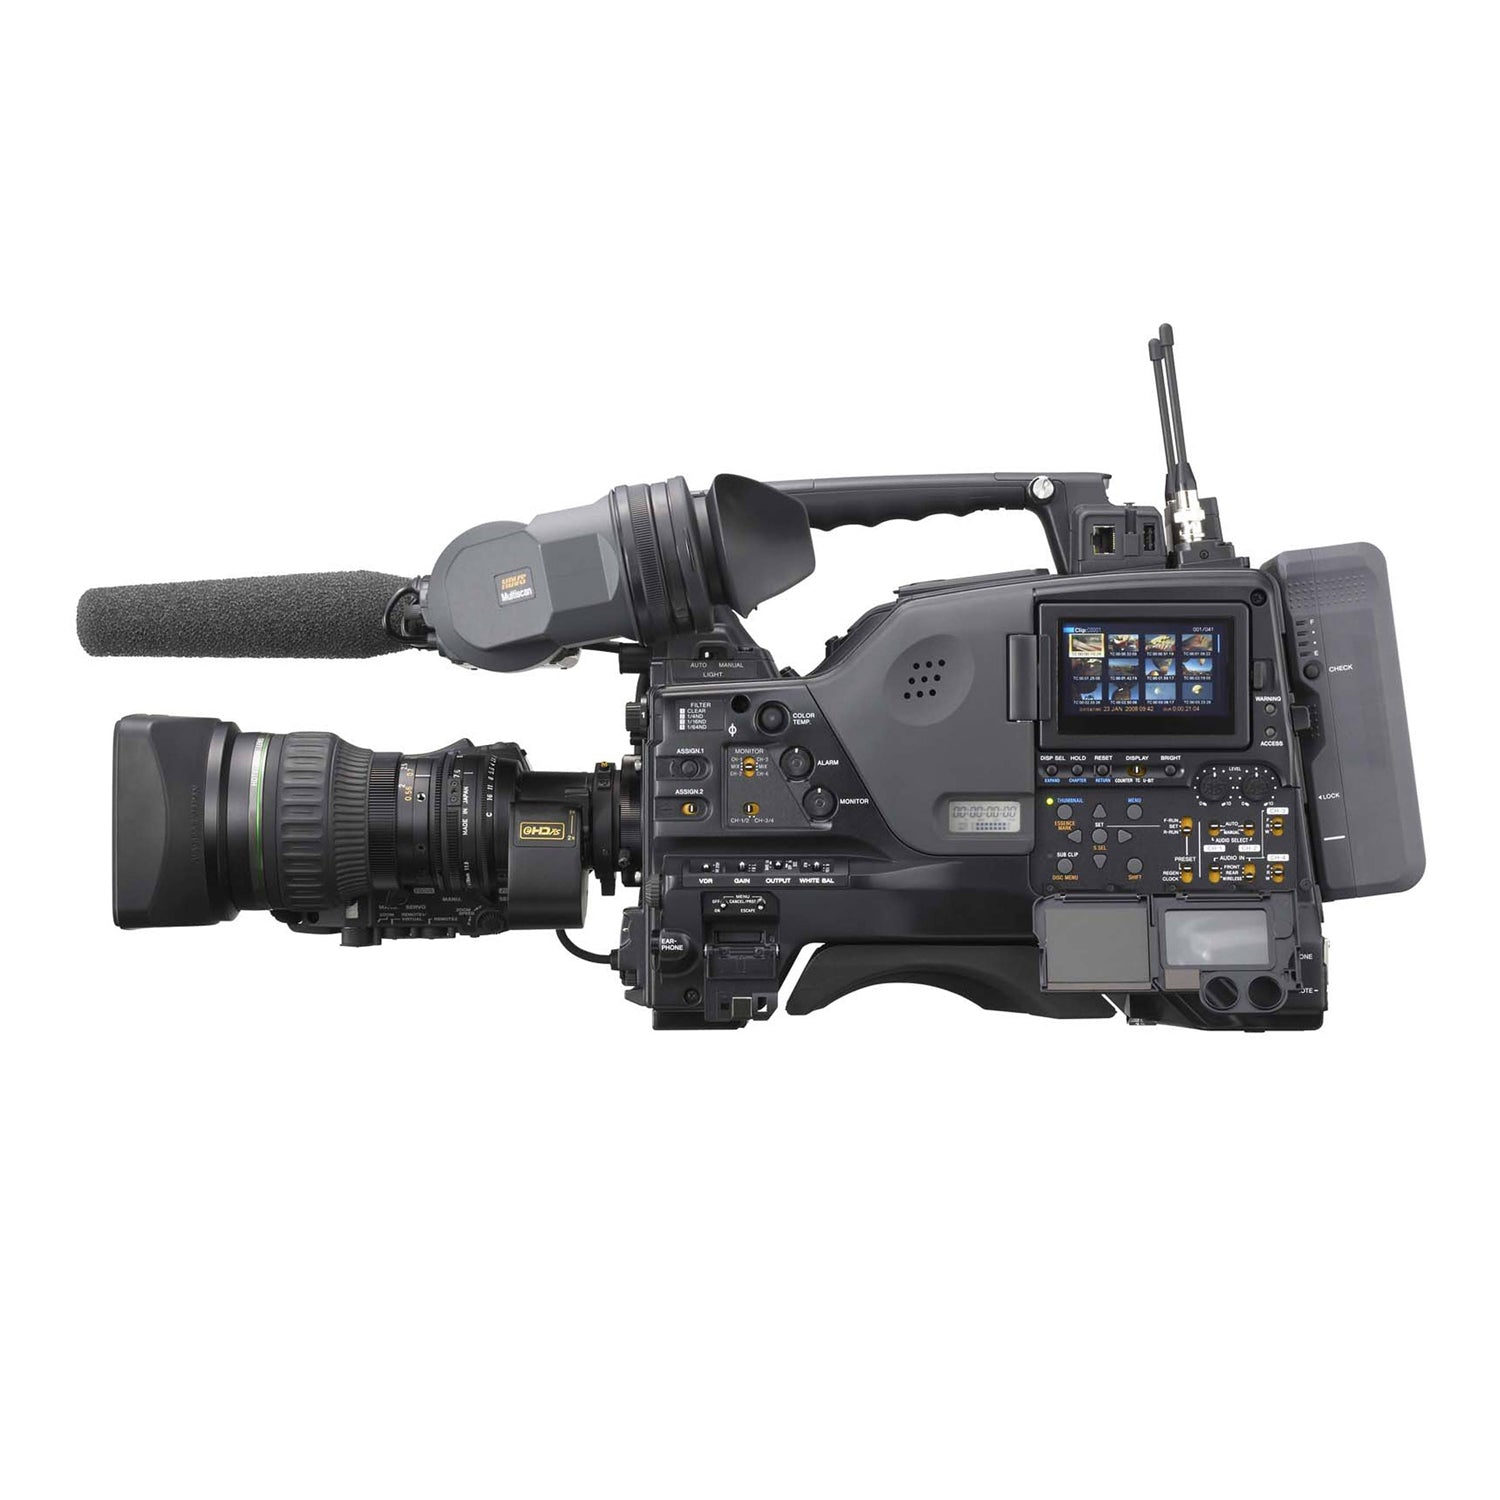 Sony PDW-700 XDCAM HD Camcorder